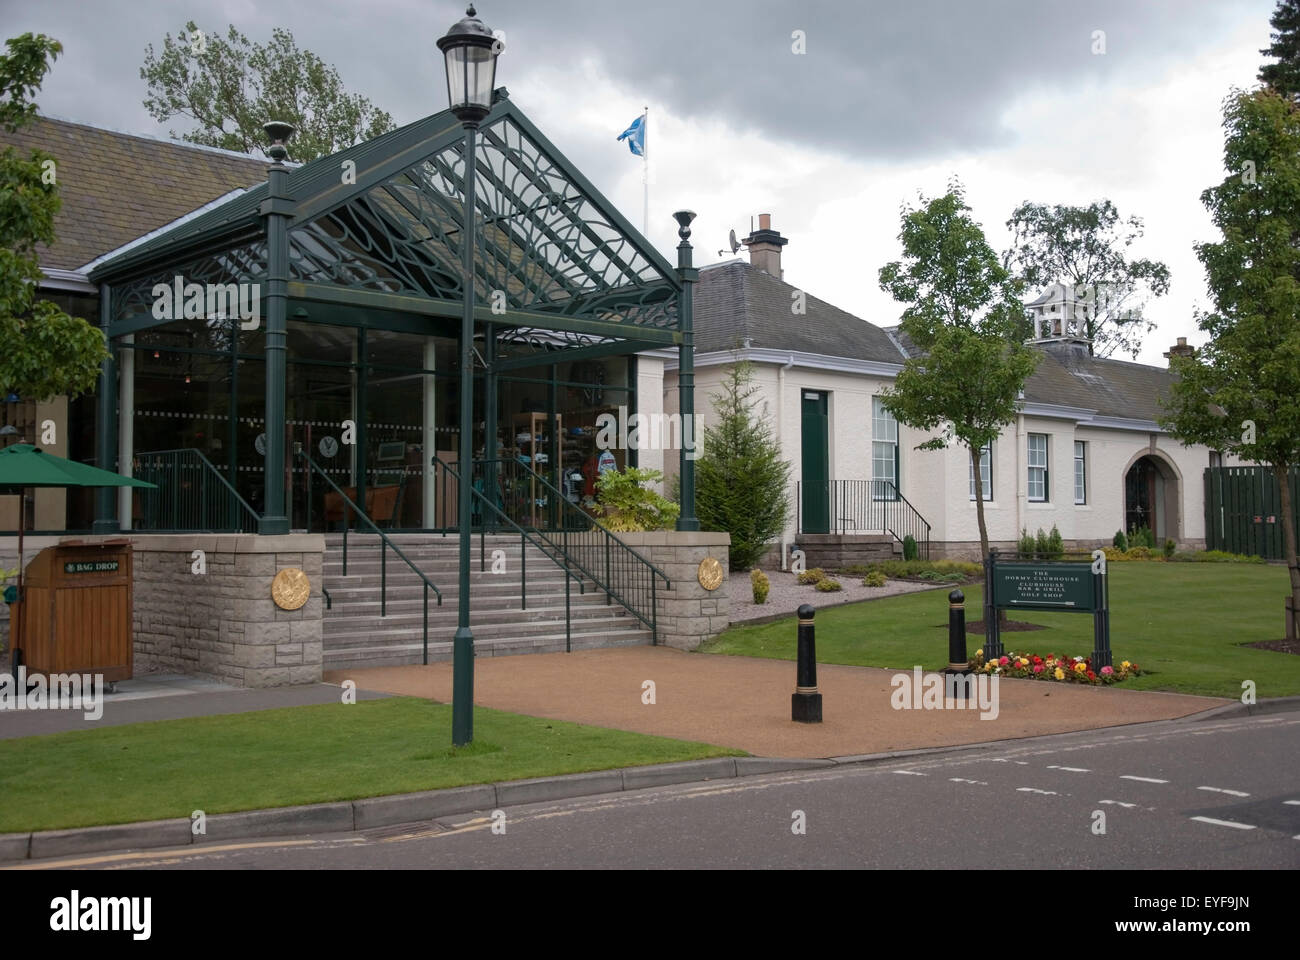 The Dormy Golf Clubhouse Bar, Grill, Restaurant at Gleneagles Hotel Stock Photo